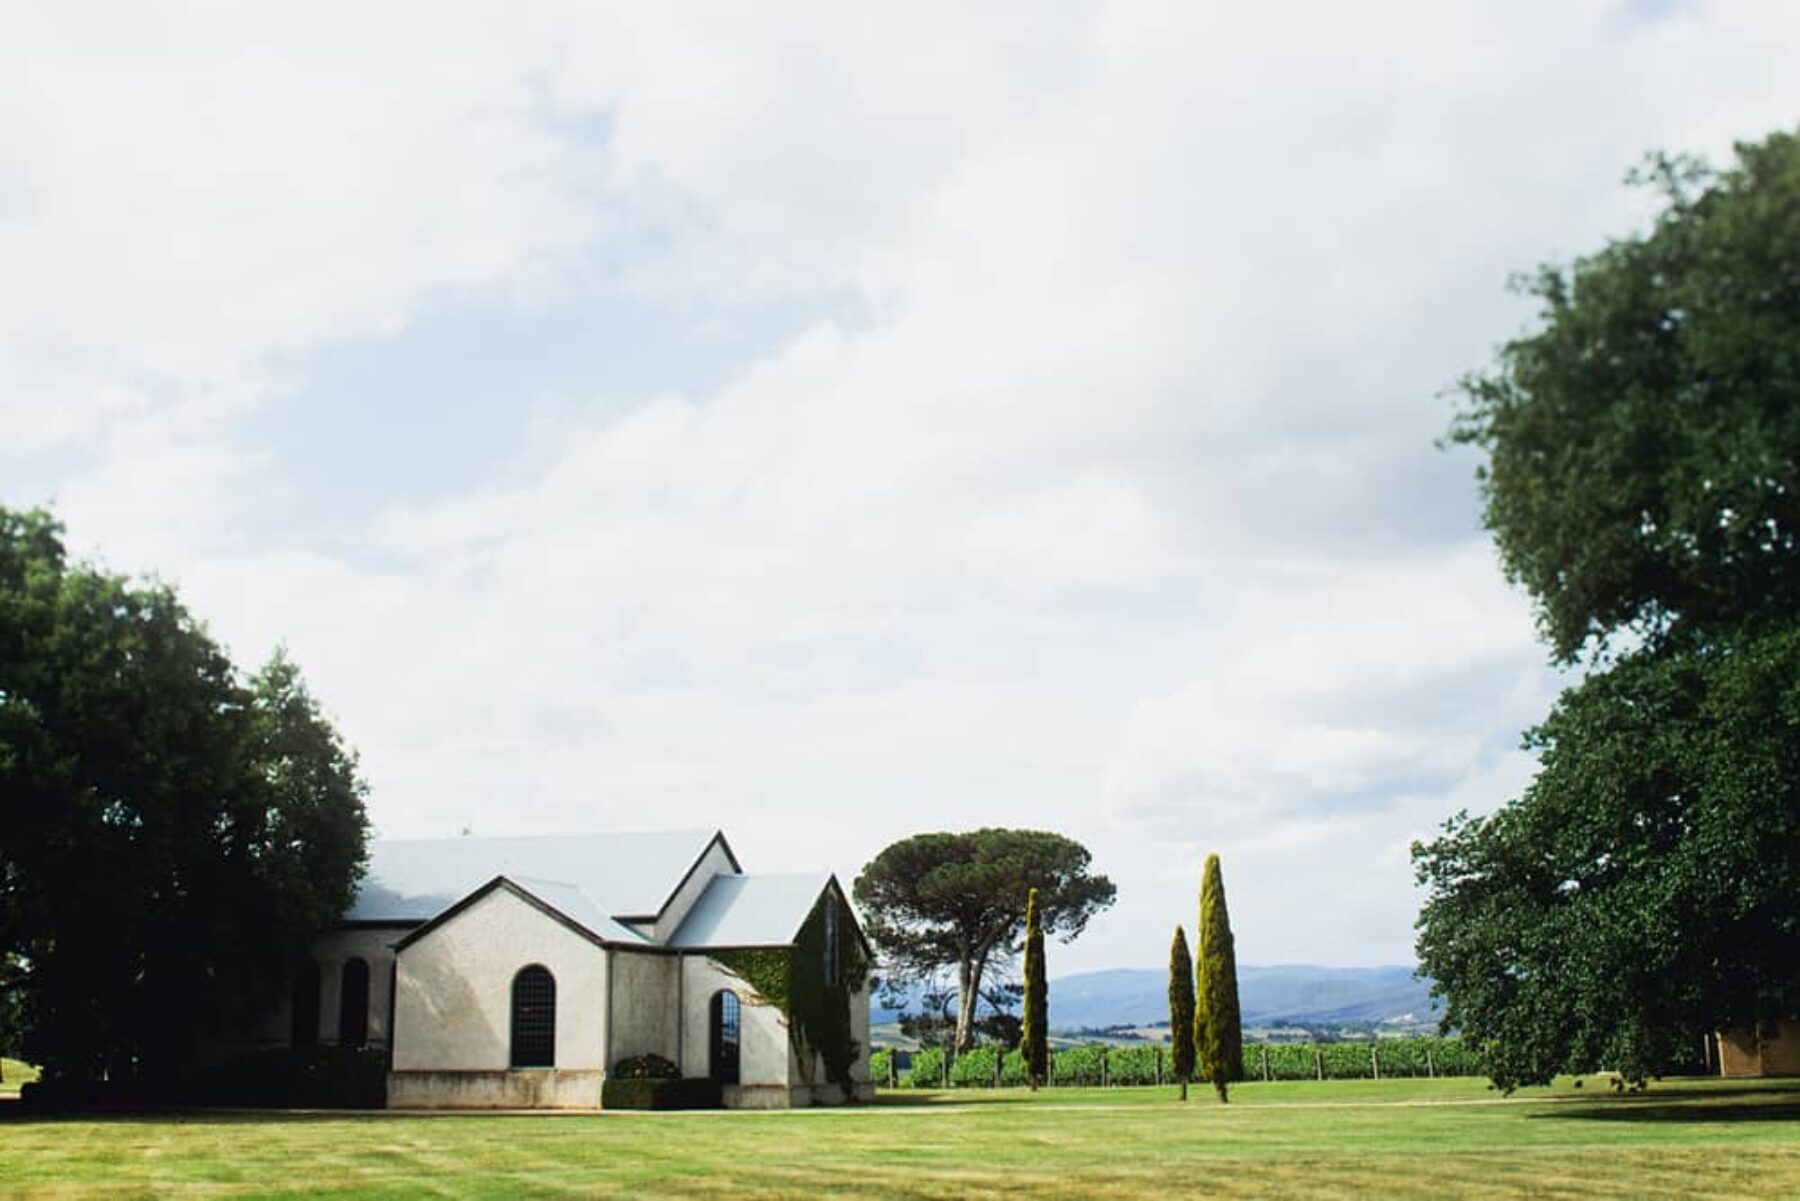 Stones of the Yarra Valley wedding - photography by Sayher Heffernan